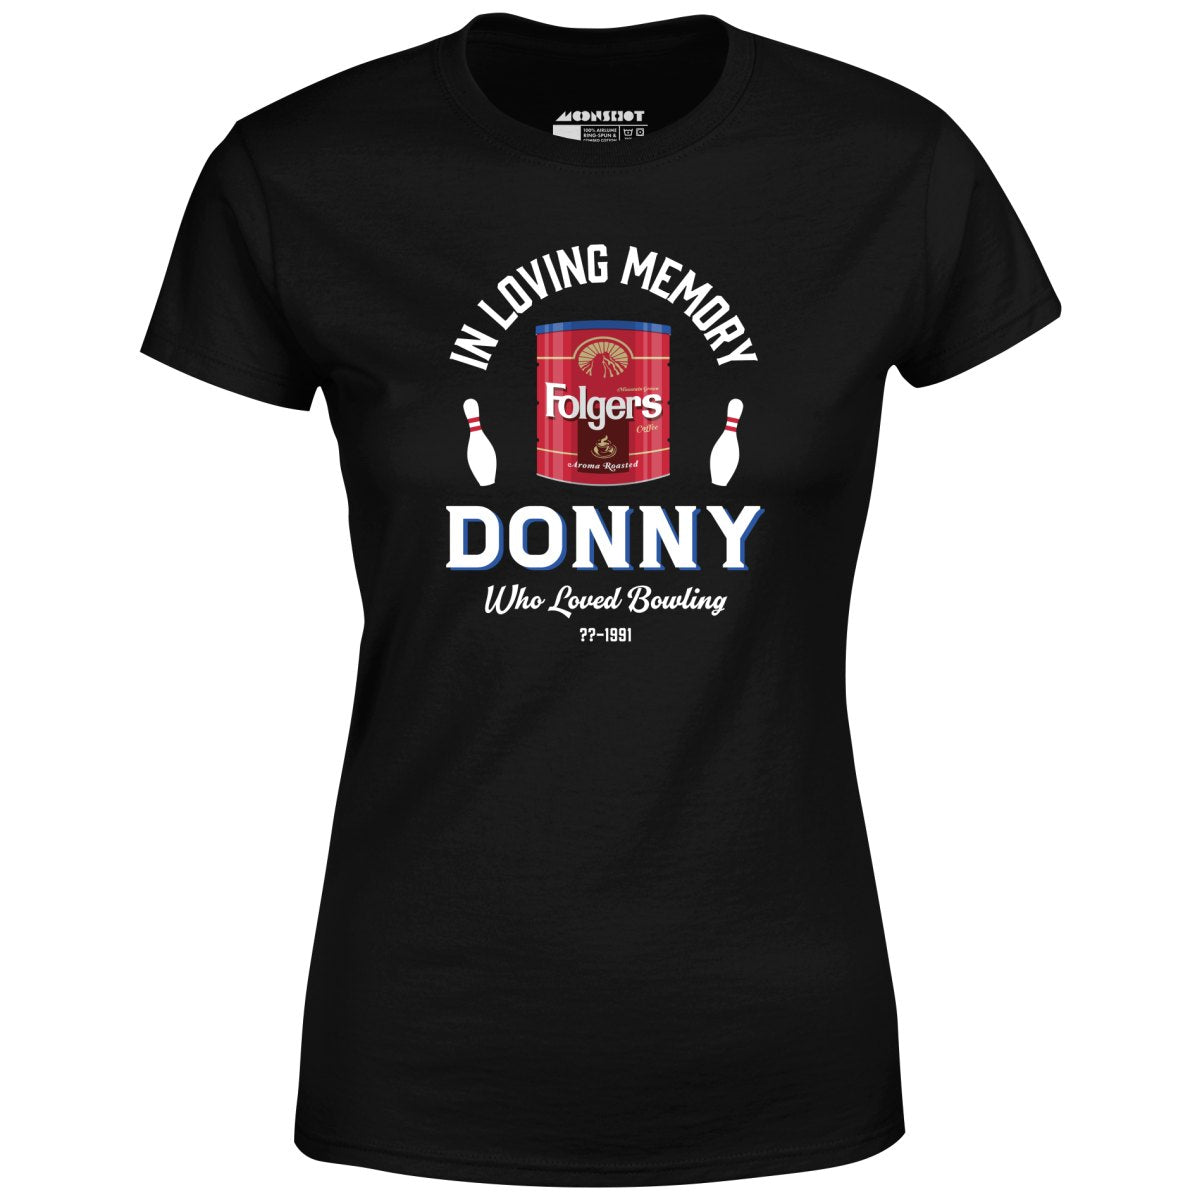 Donny Who Loved Bowling - Women's T-Shirt